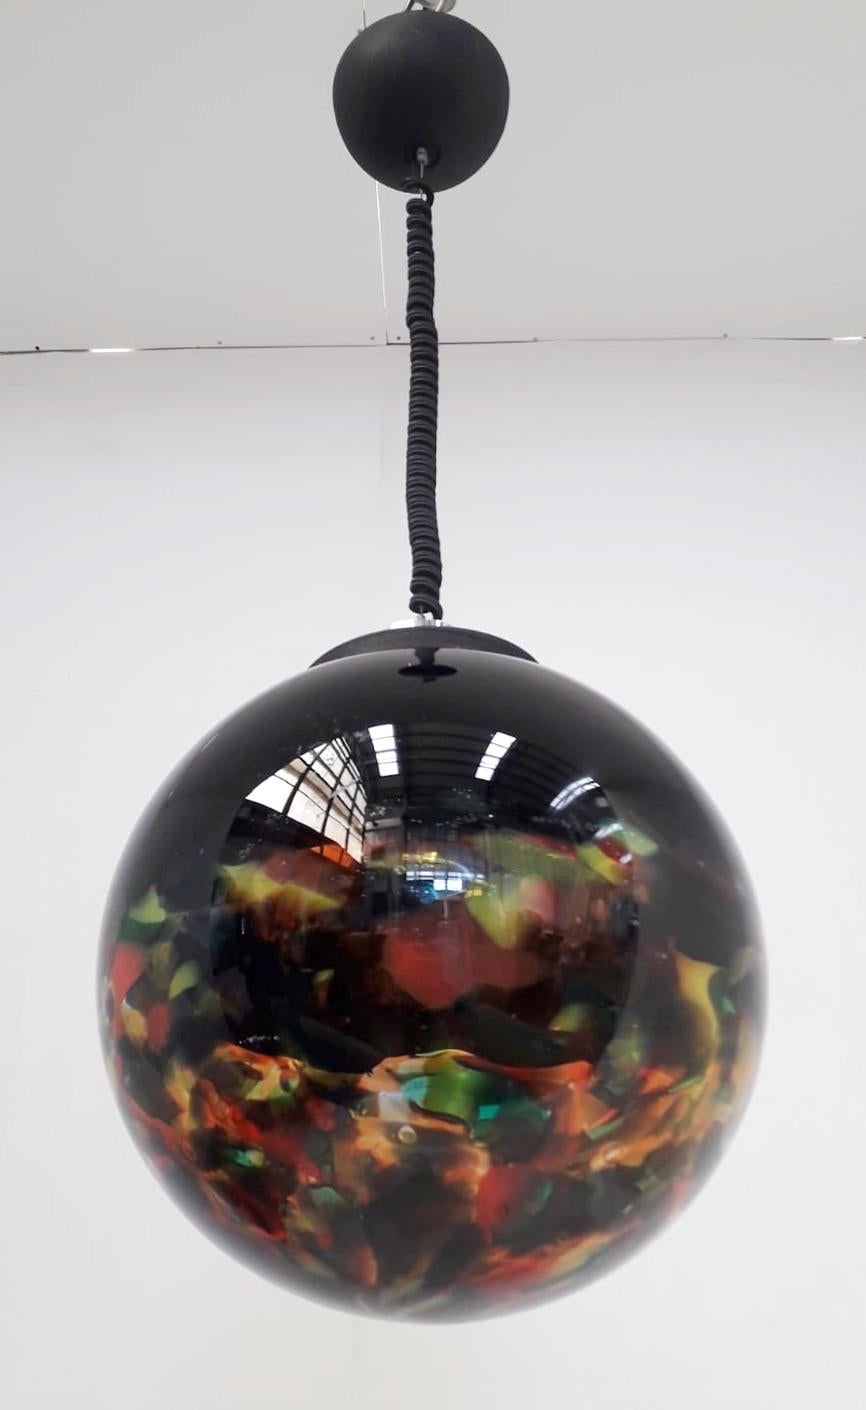 Italian Murano glass globe pendant blown with black and multicolored hemispheres / Made in Italy circa 1960s
Single light / E26 or E27 type / max 60W
Diameter 14 inches / height 14 inches plus adjustable cable and canopy
1 in stock in Italy
Order